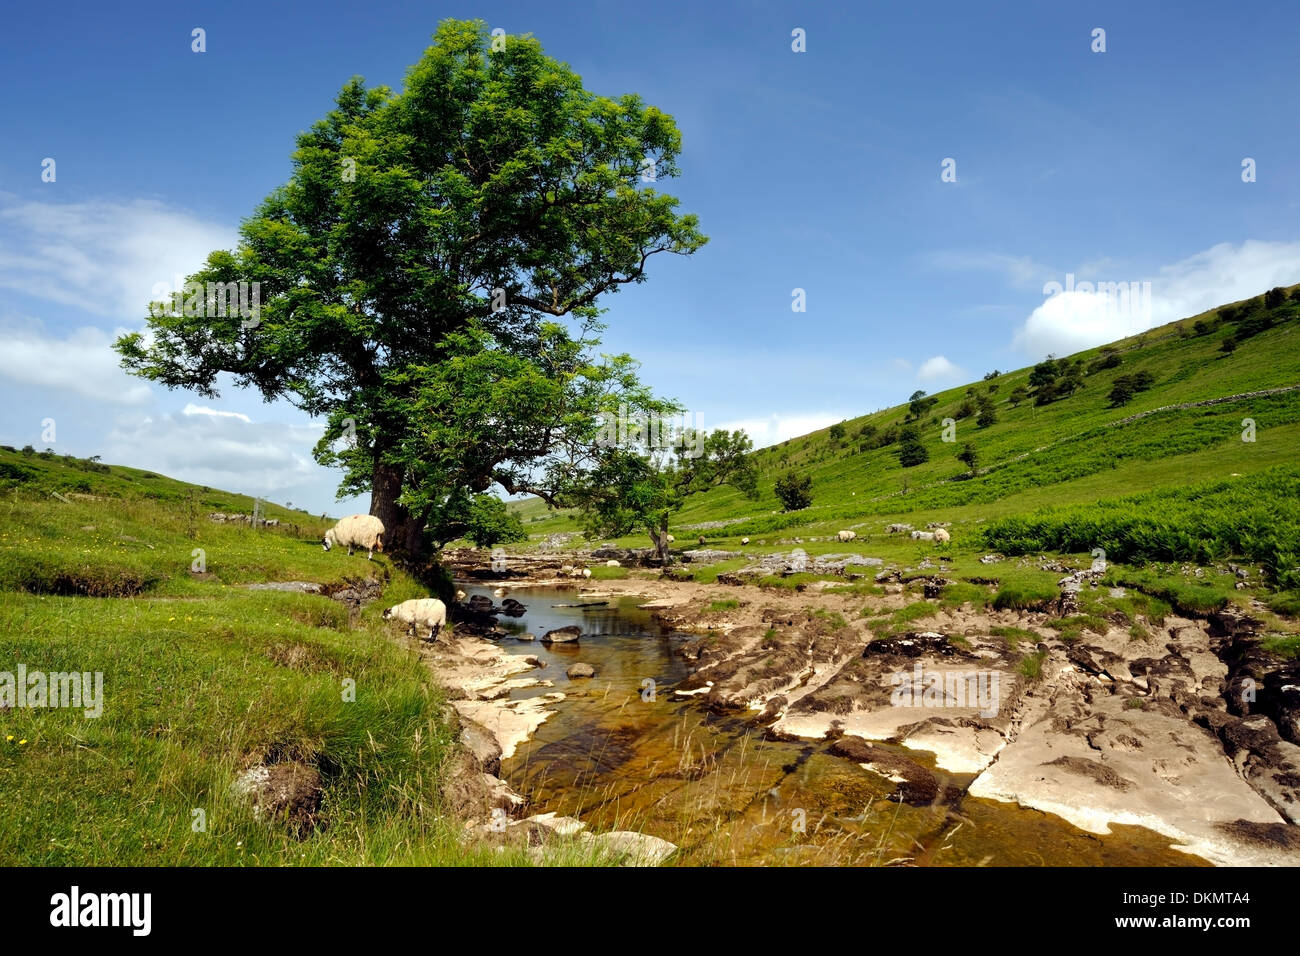 The infant river Wharfe flowing through the rugged attractiveness of Langstrothdale Chase, Yorkshire Dales, England Stock Photo